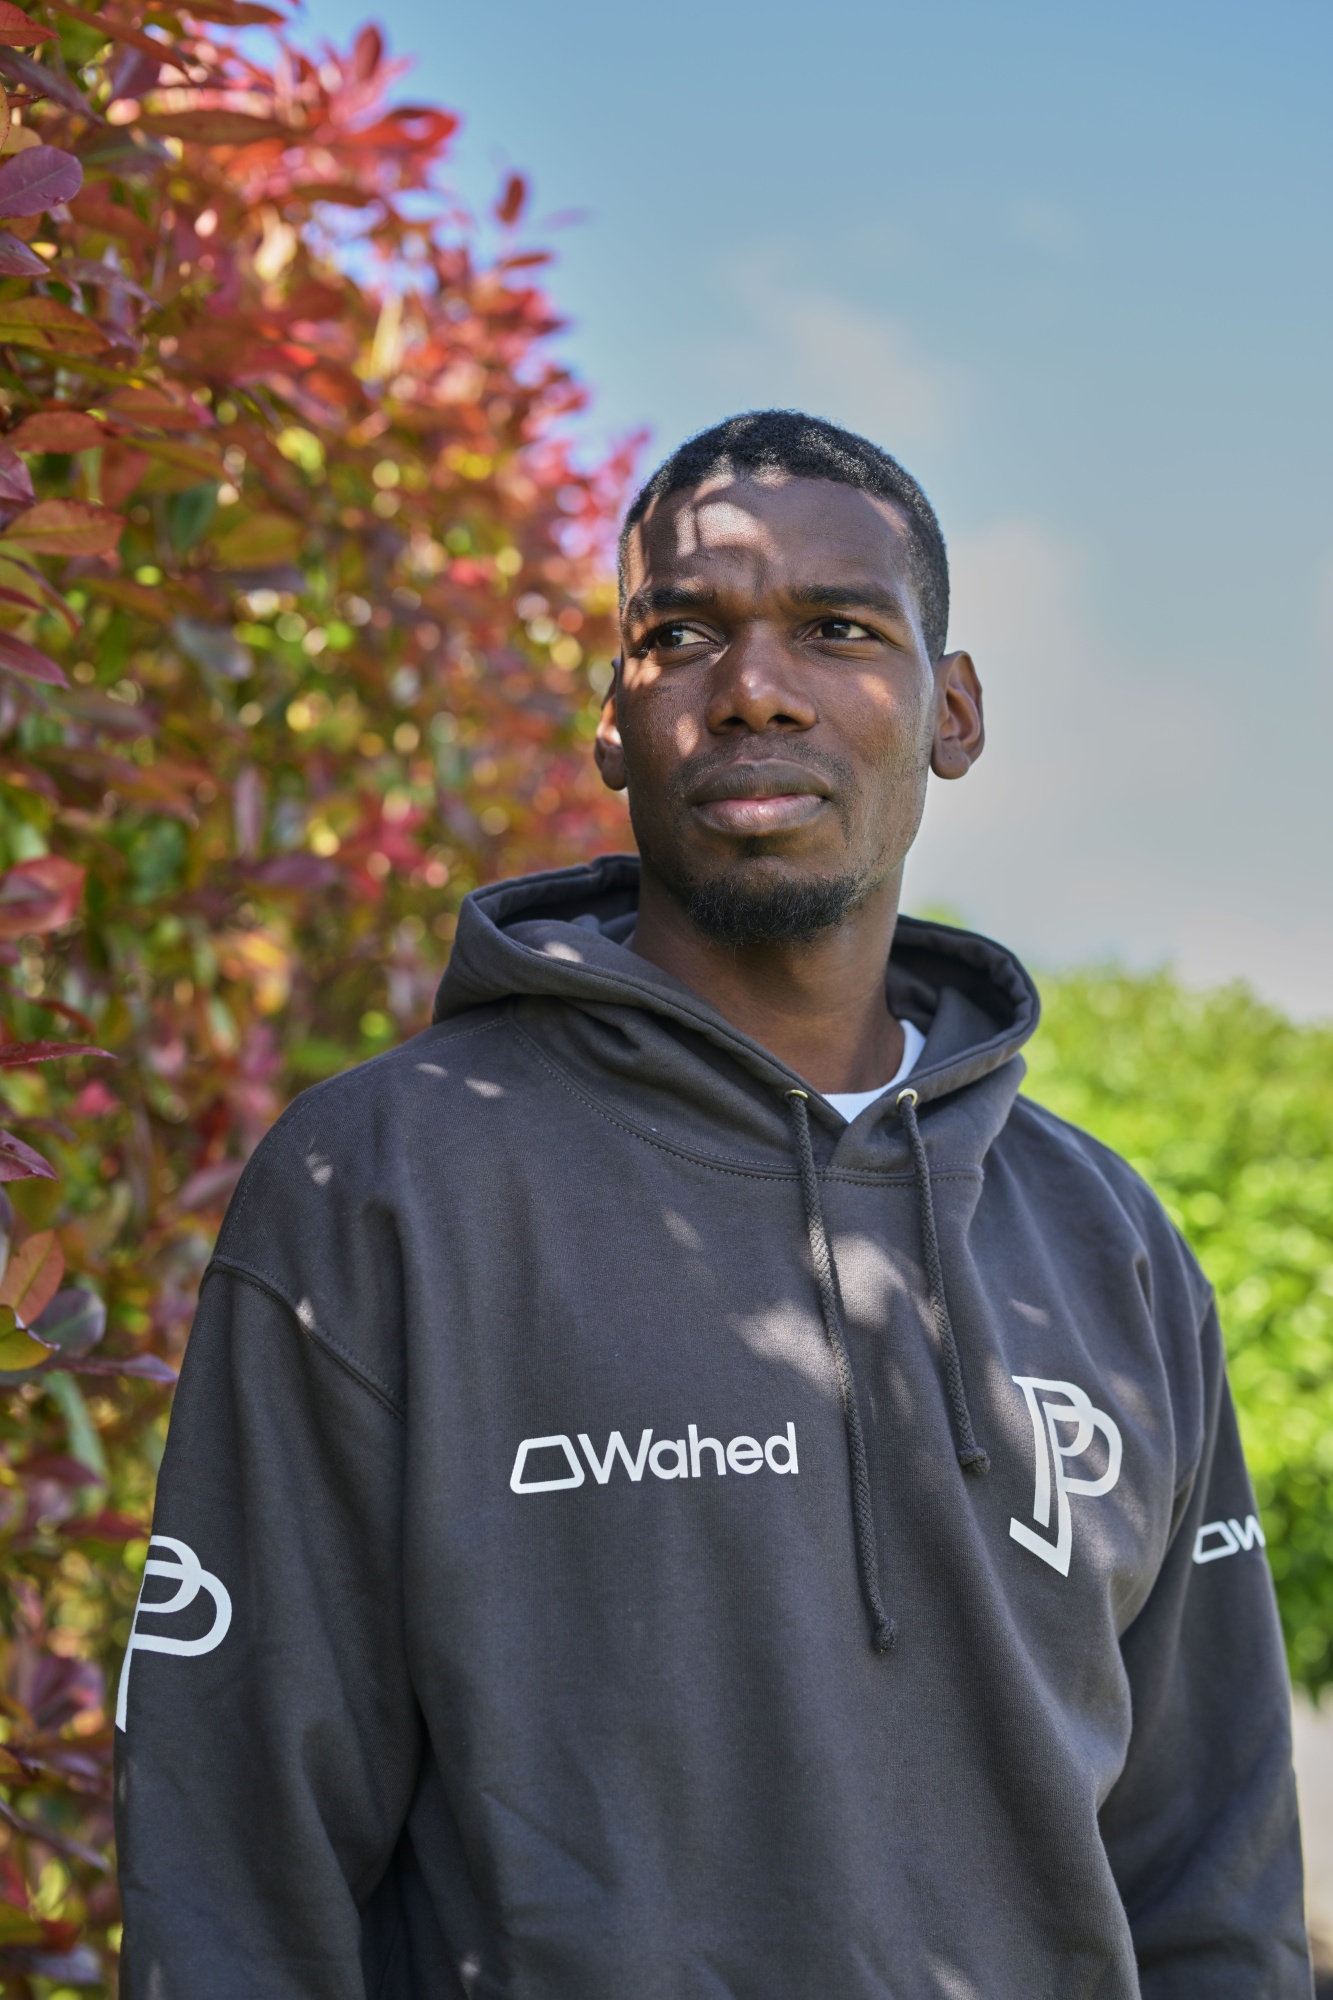 LIKE A MODEL: Pogba - The top midfielder who is a leader of alternative  fashion